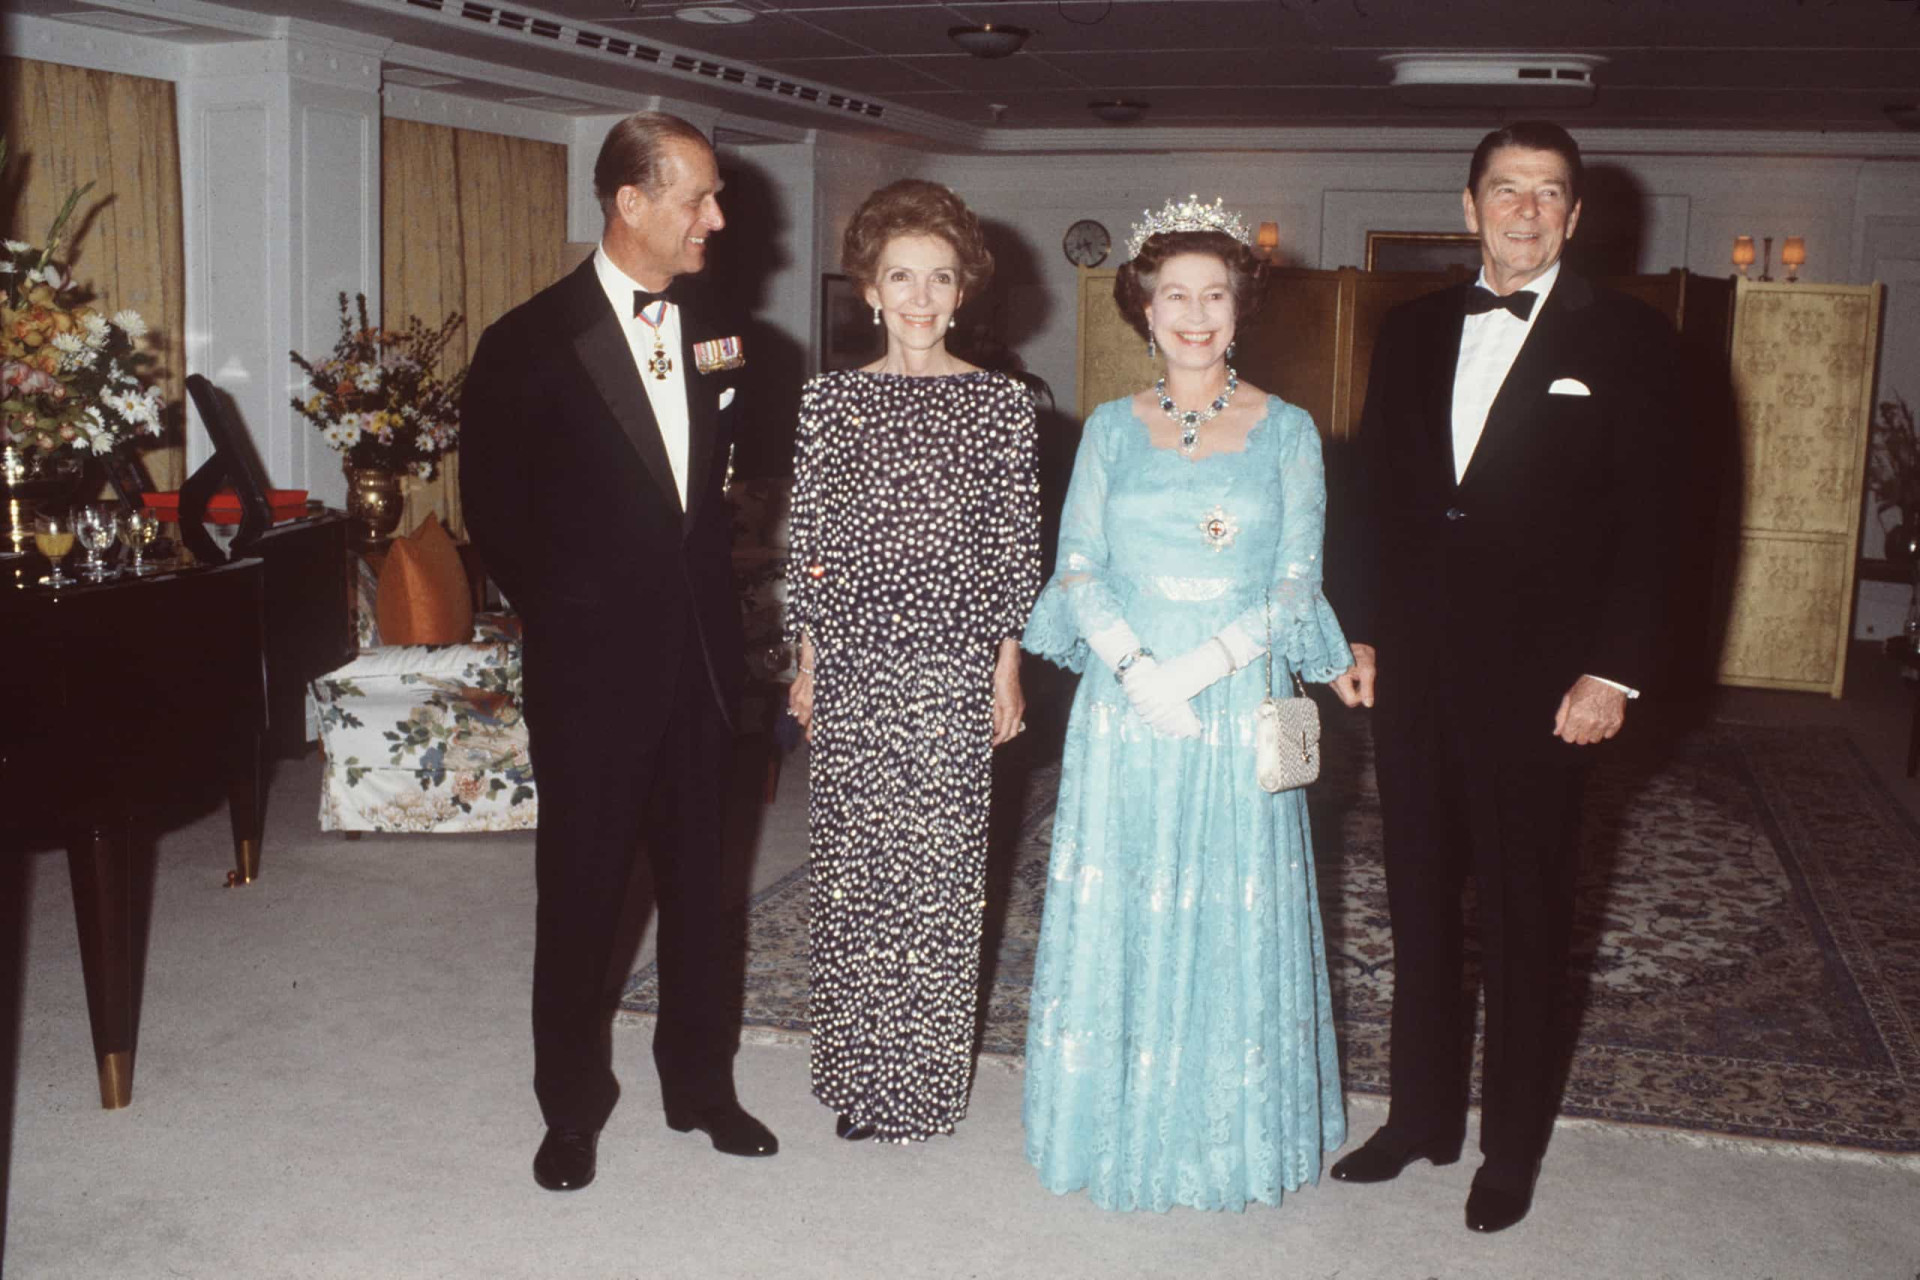 <p>Queen Elizabeth and Prince Philip with US President Ronald Reagan and his wife Nancy on board <em>Britannica</em> during an official tour of America in 1983. A banquet was held on the vessel on March 4, 1983 to celebrate the Reagan's wedding anniversary.</p><p><a href="https://www.msn.com/en-sg/community/channel/vid-7xx8mnucu55yw63we9va2gwr7uihbxwc68fxqp25x6tg4ftibpra?cvid=94631541bc0f4f89bfd59158d696ad7e">Follow us and access great exclusive content every day</a></p>